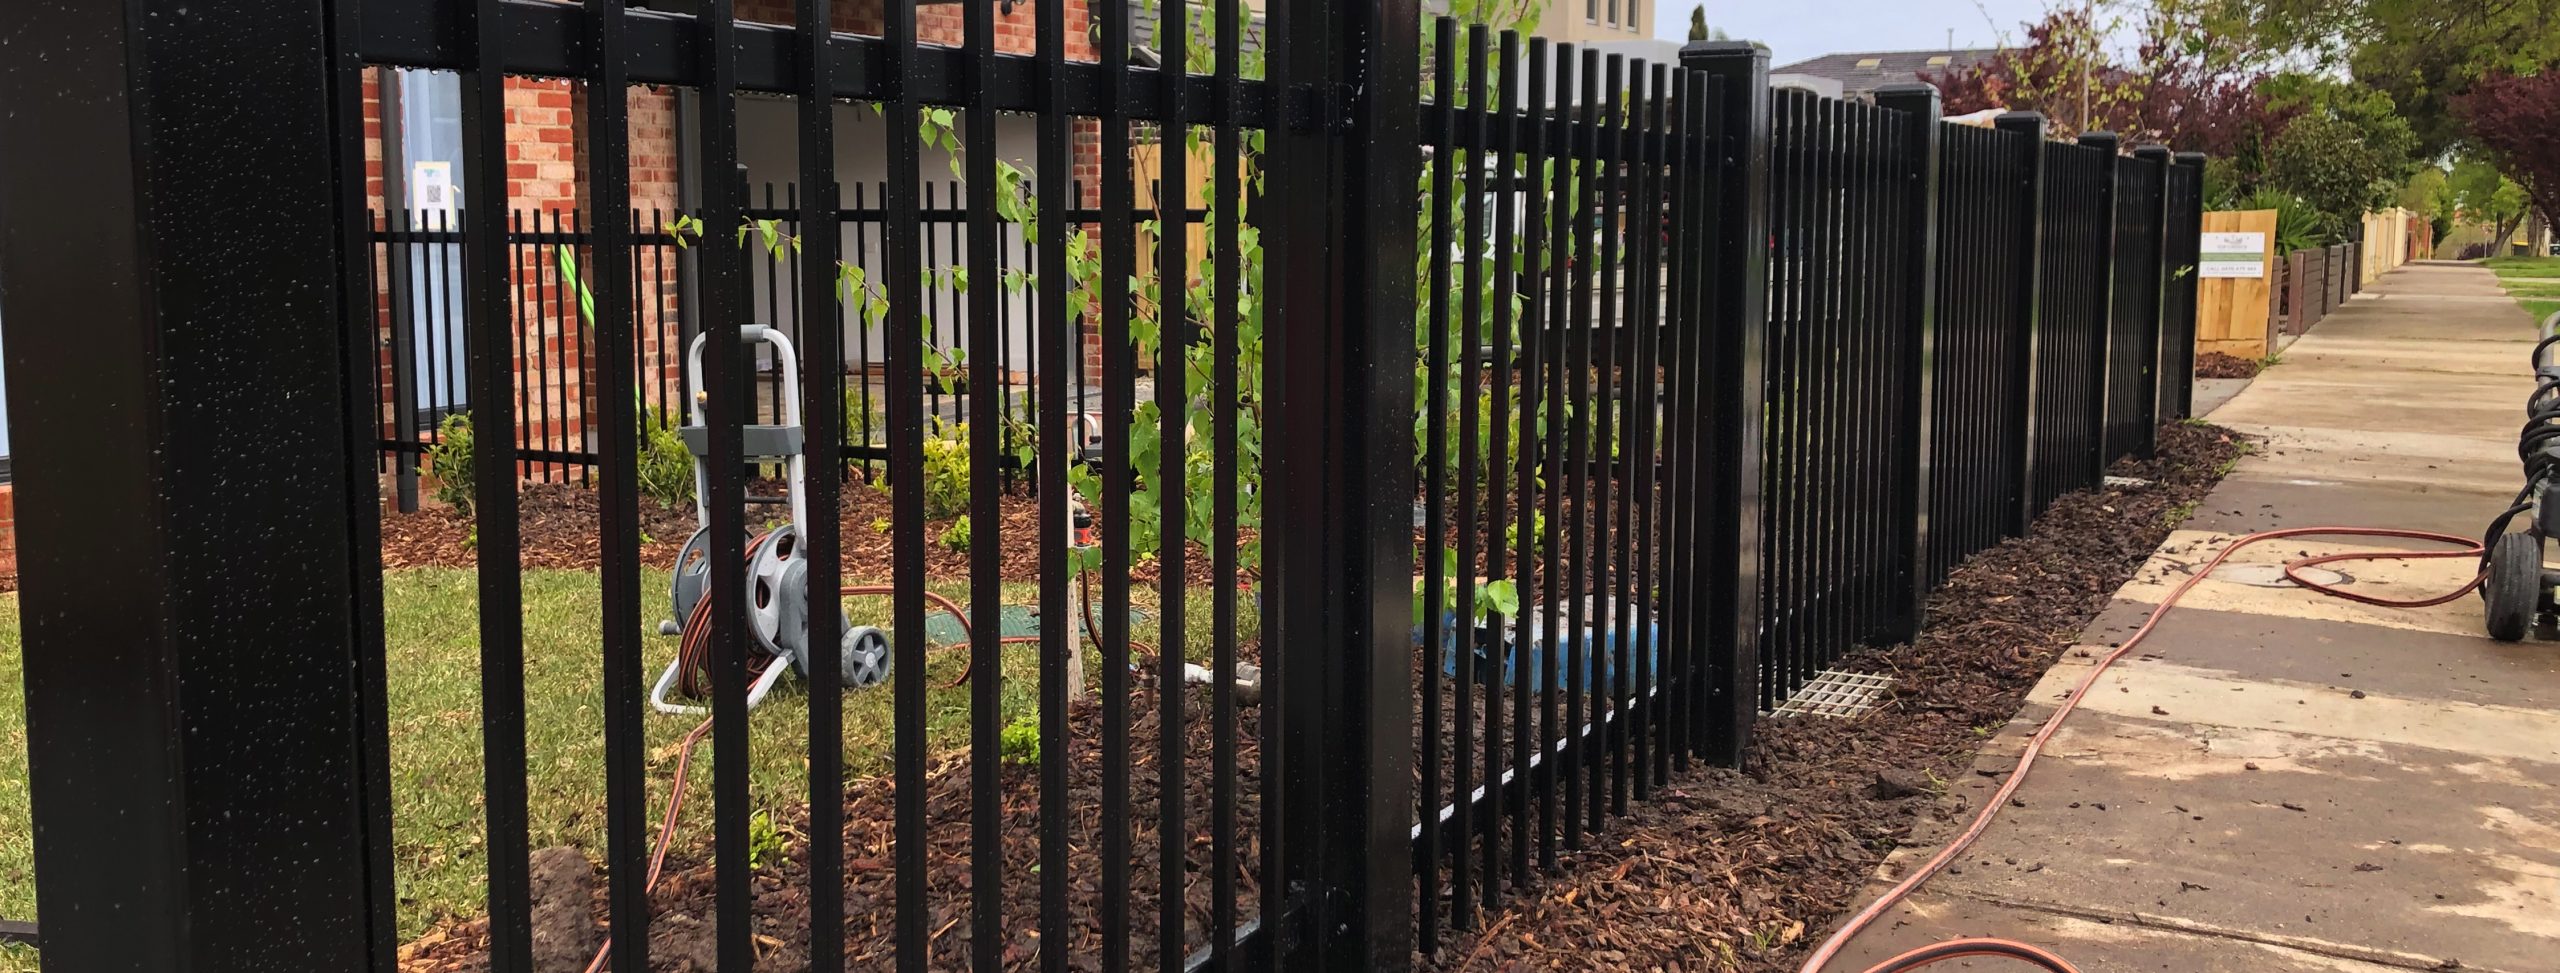 Steel Post fence designed and built by Custom Built Fences